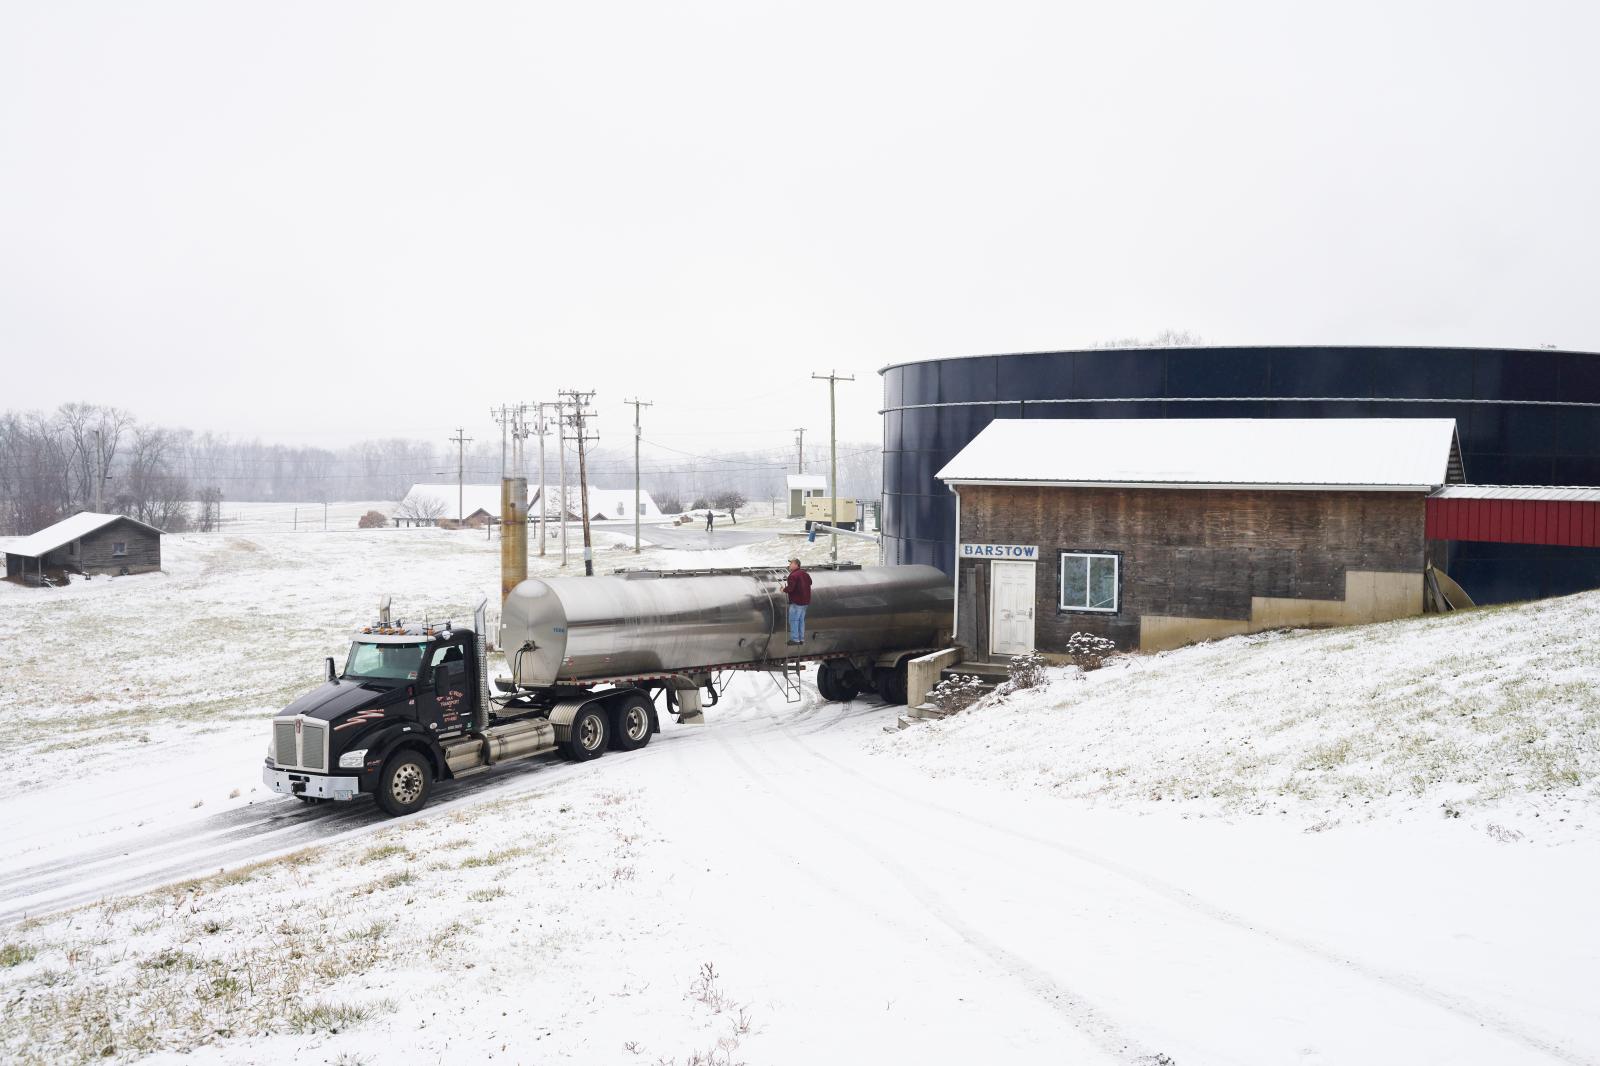 The Smithsonian Magazine: Manure Into Money - Hadley, Massachusetts - January 12: A milk truck fills up, while the large blue tank behind holds...